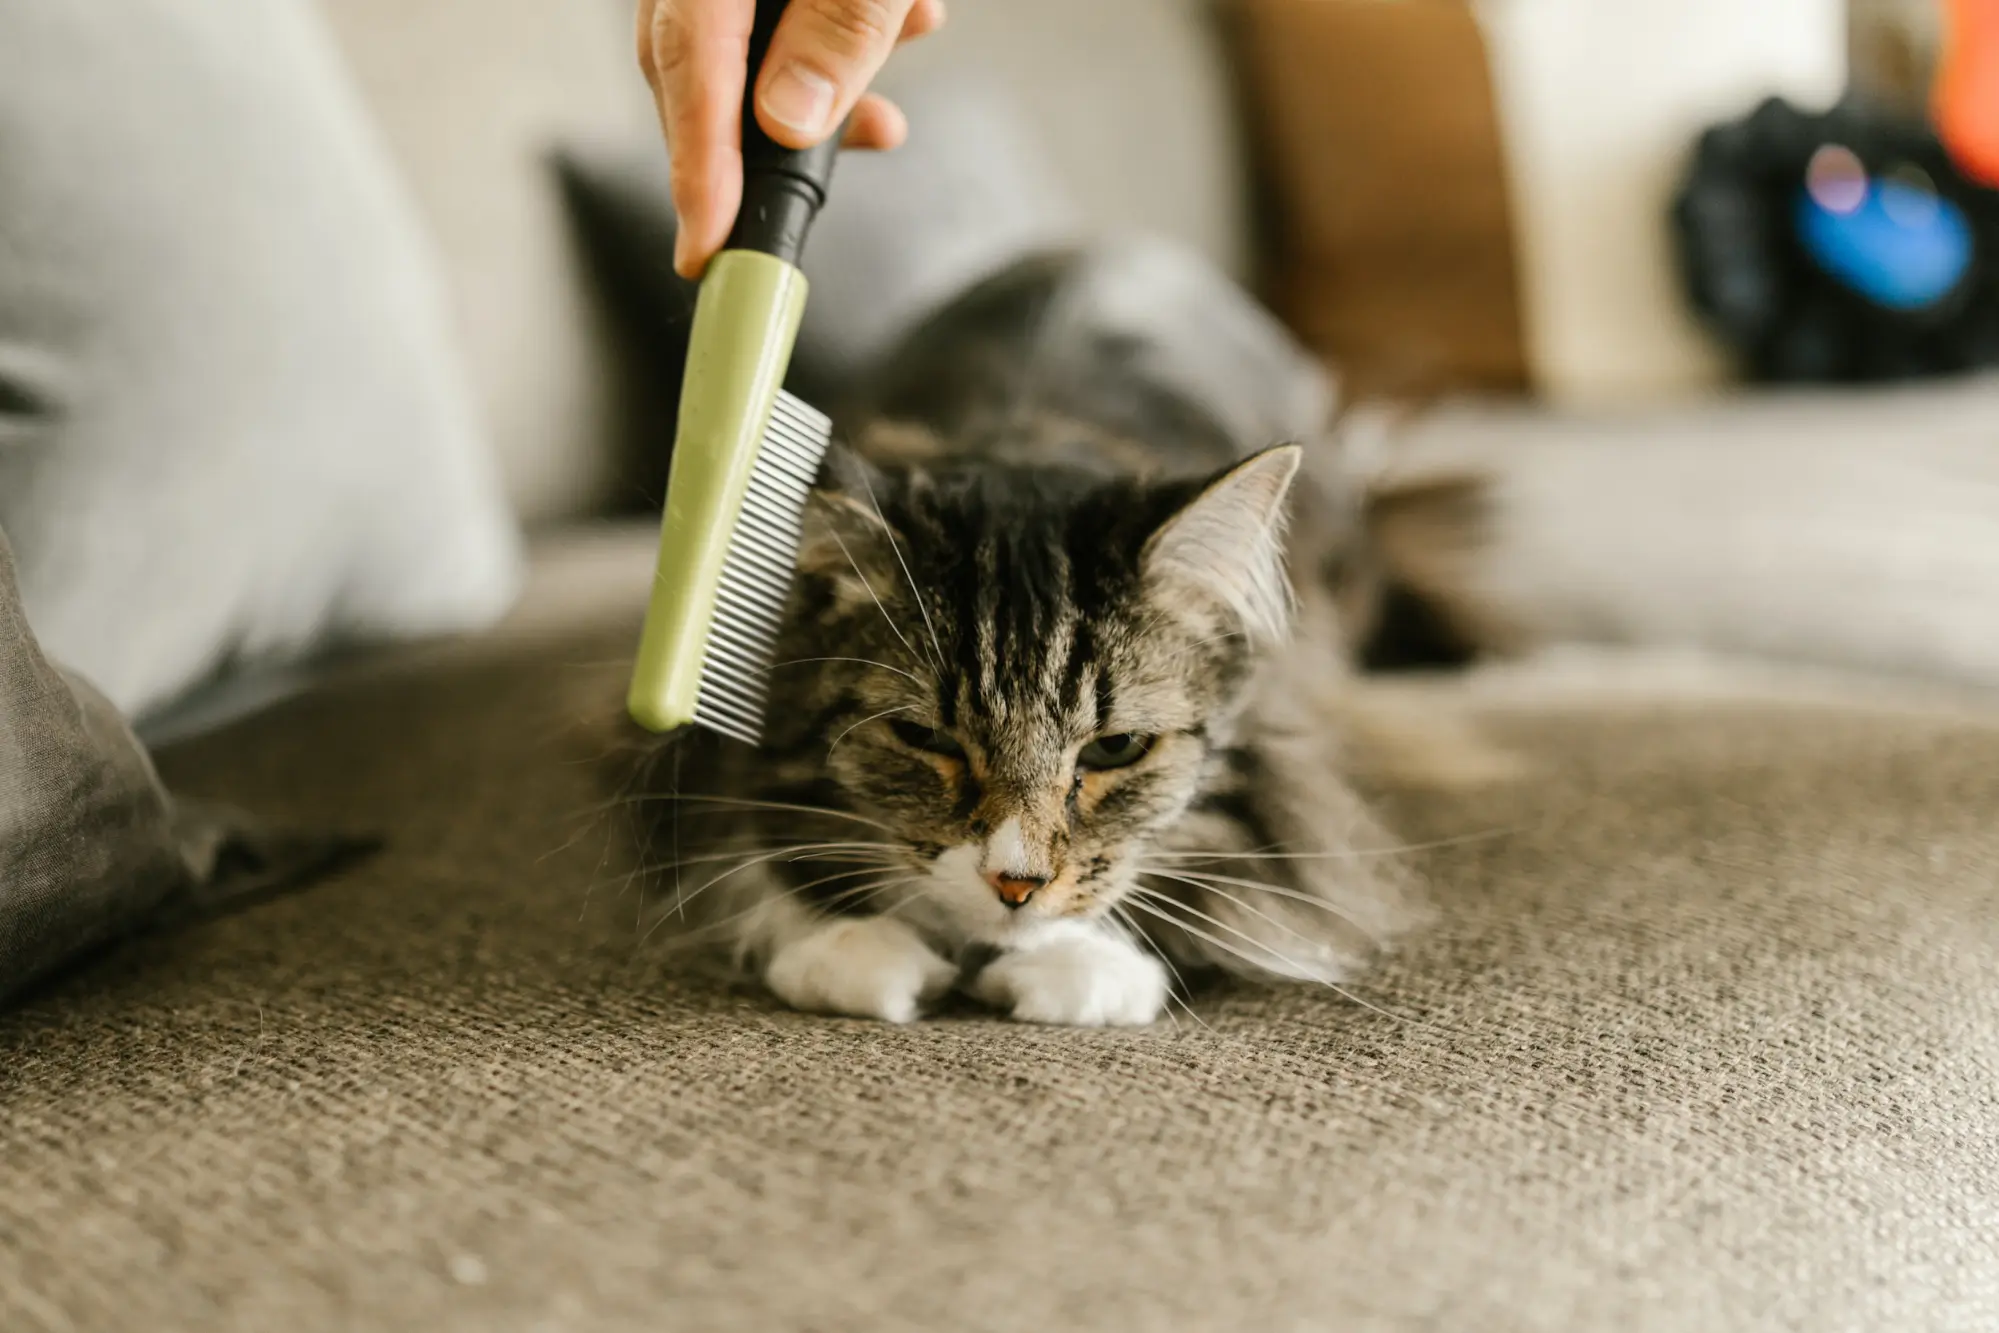 Silver tabby cat on  gray carpet getting brushed